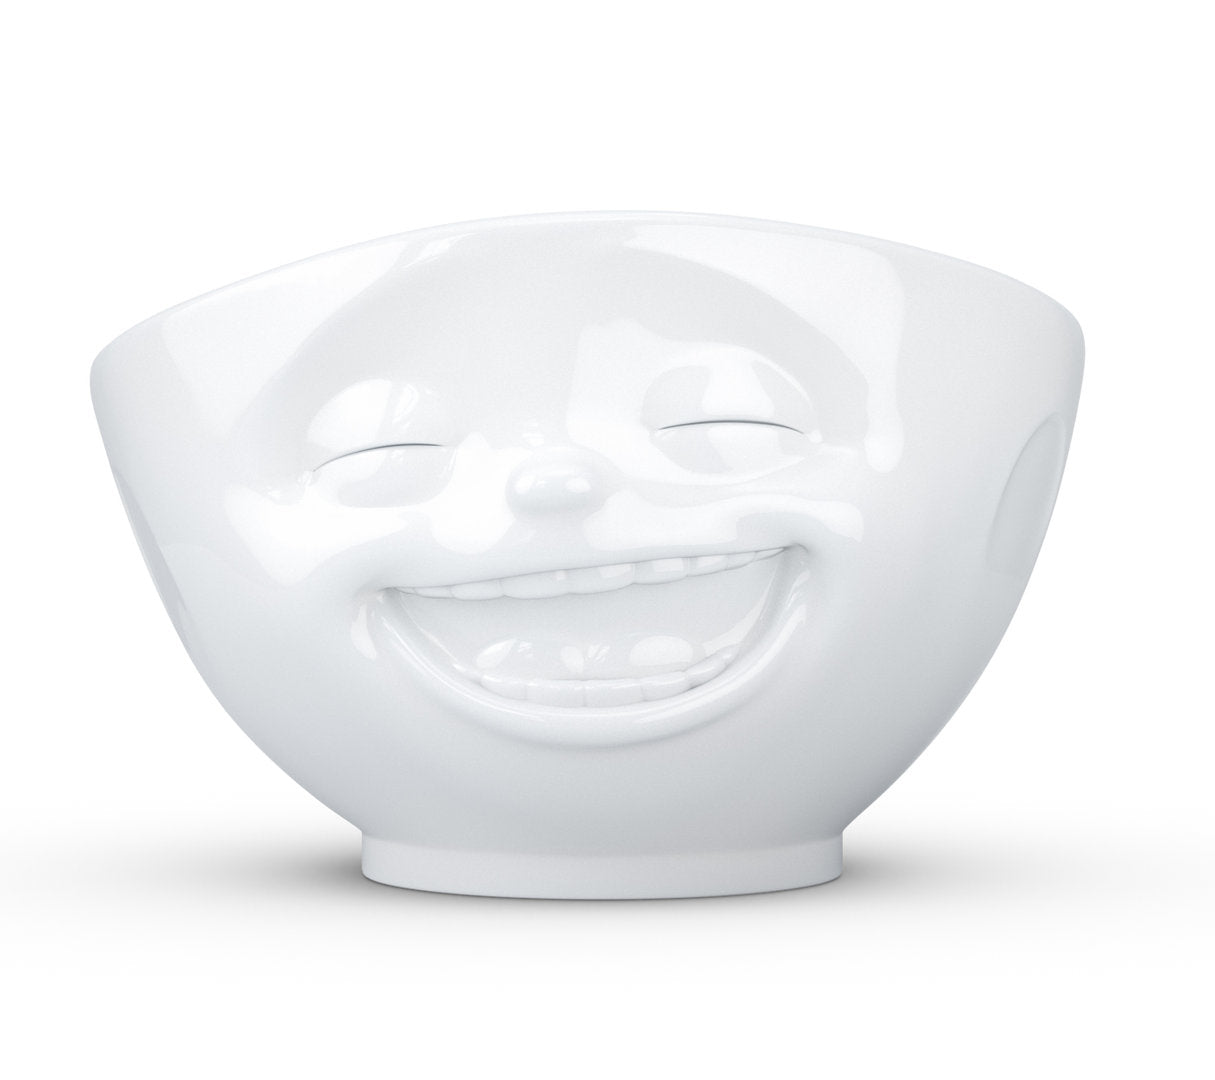 Cup Laughing white - TV cups